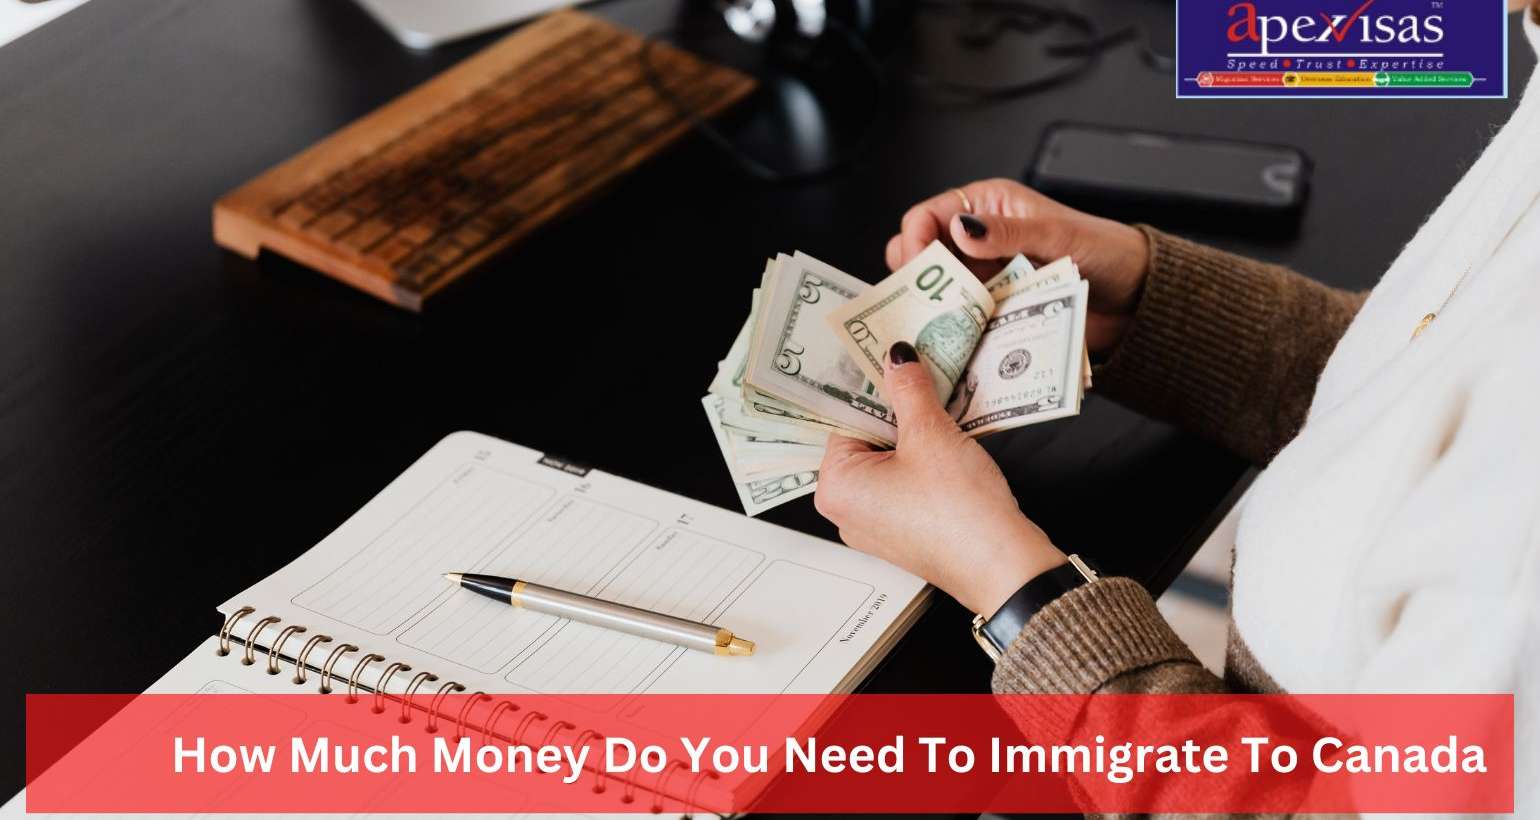 How Much Money Do You Need To Immigrate To Canada?